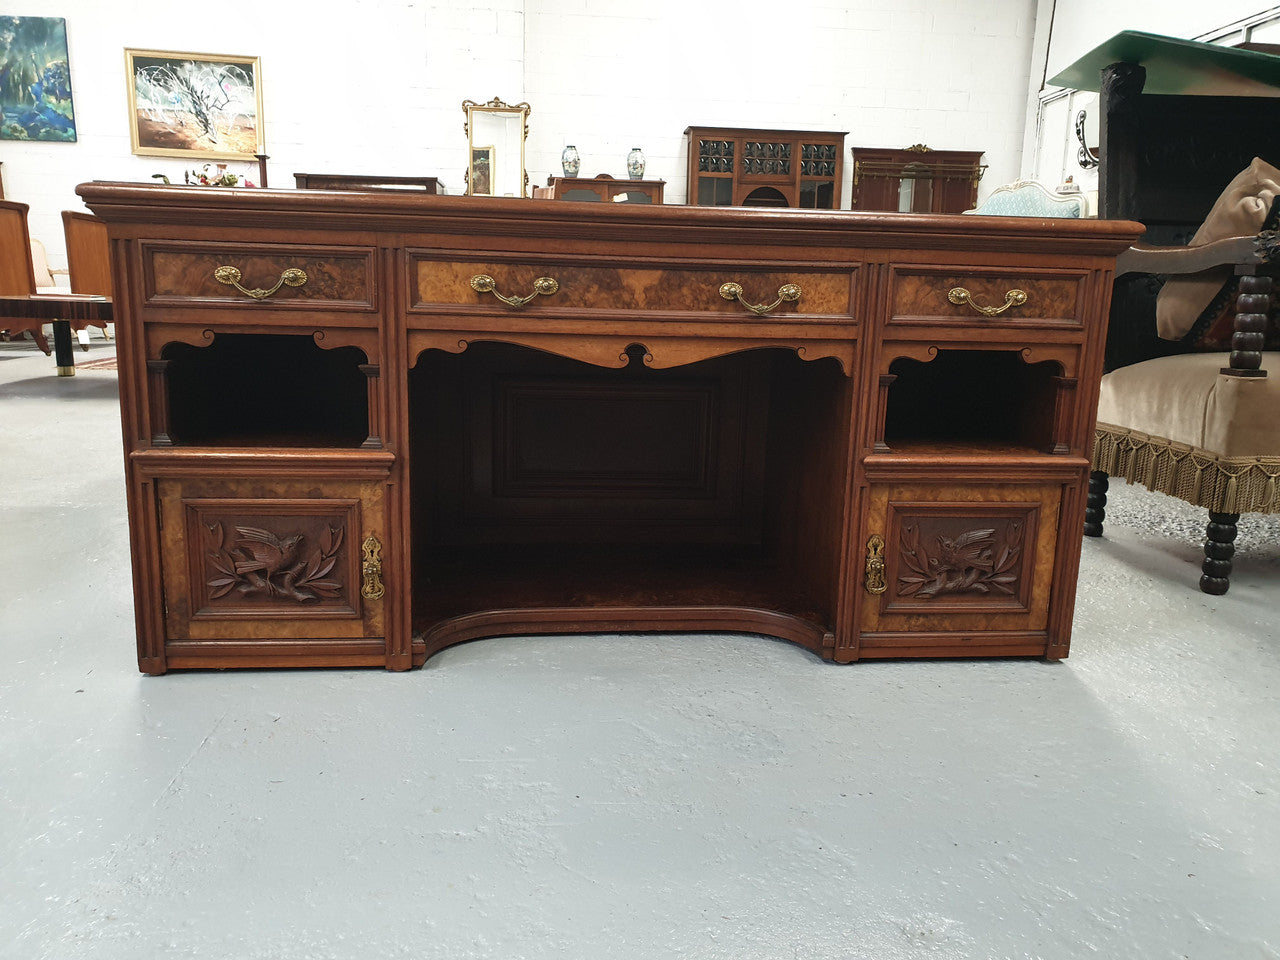 Victorian Burr Walnut ideal TV cabinet. Has plenty of room for a large TV and has plenty of storage space with 3 drawers and 2 cupboards. In good original condition.